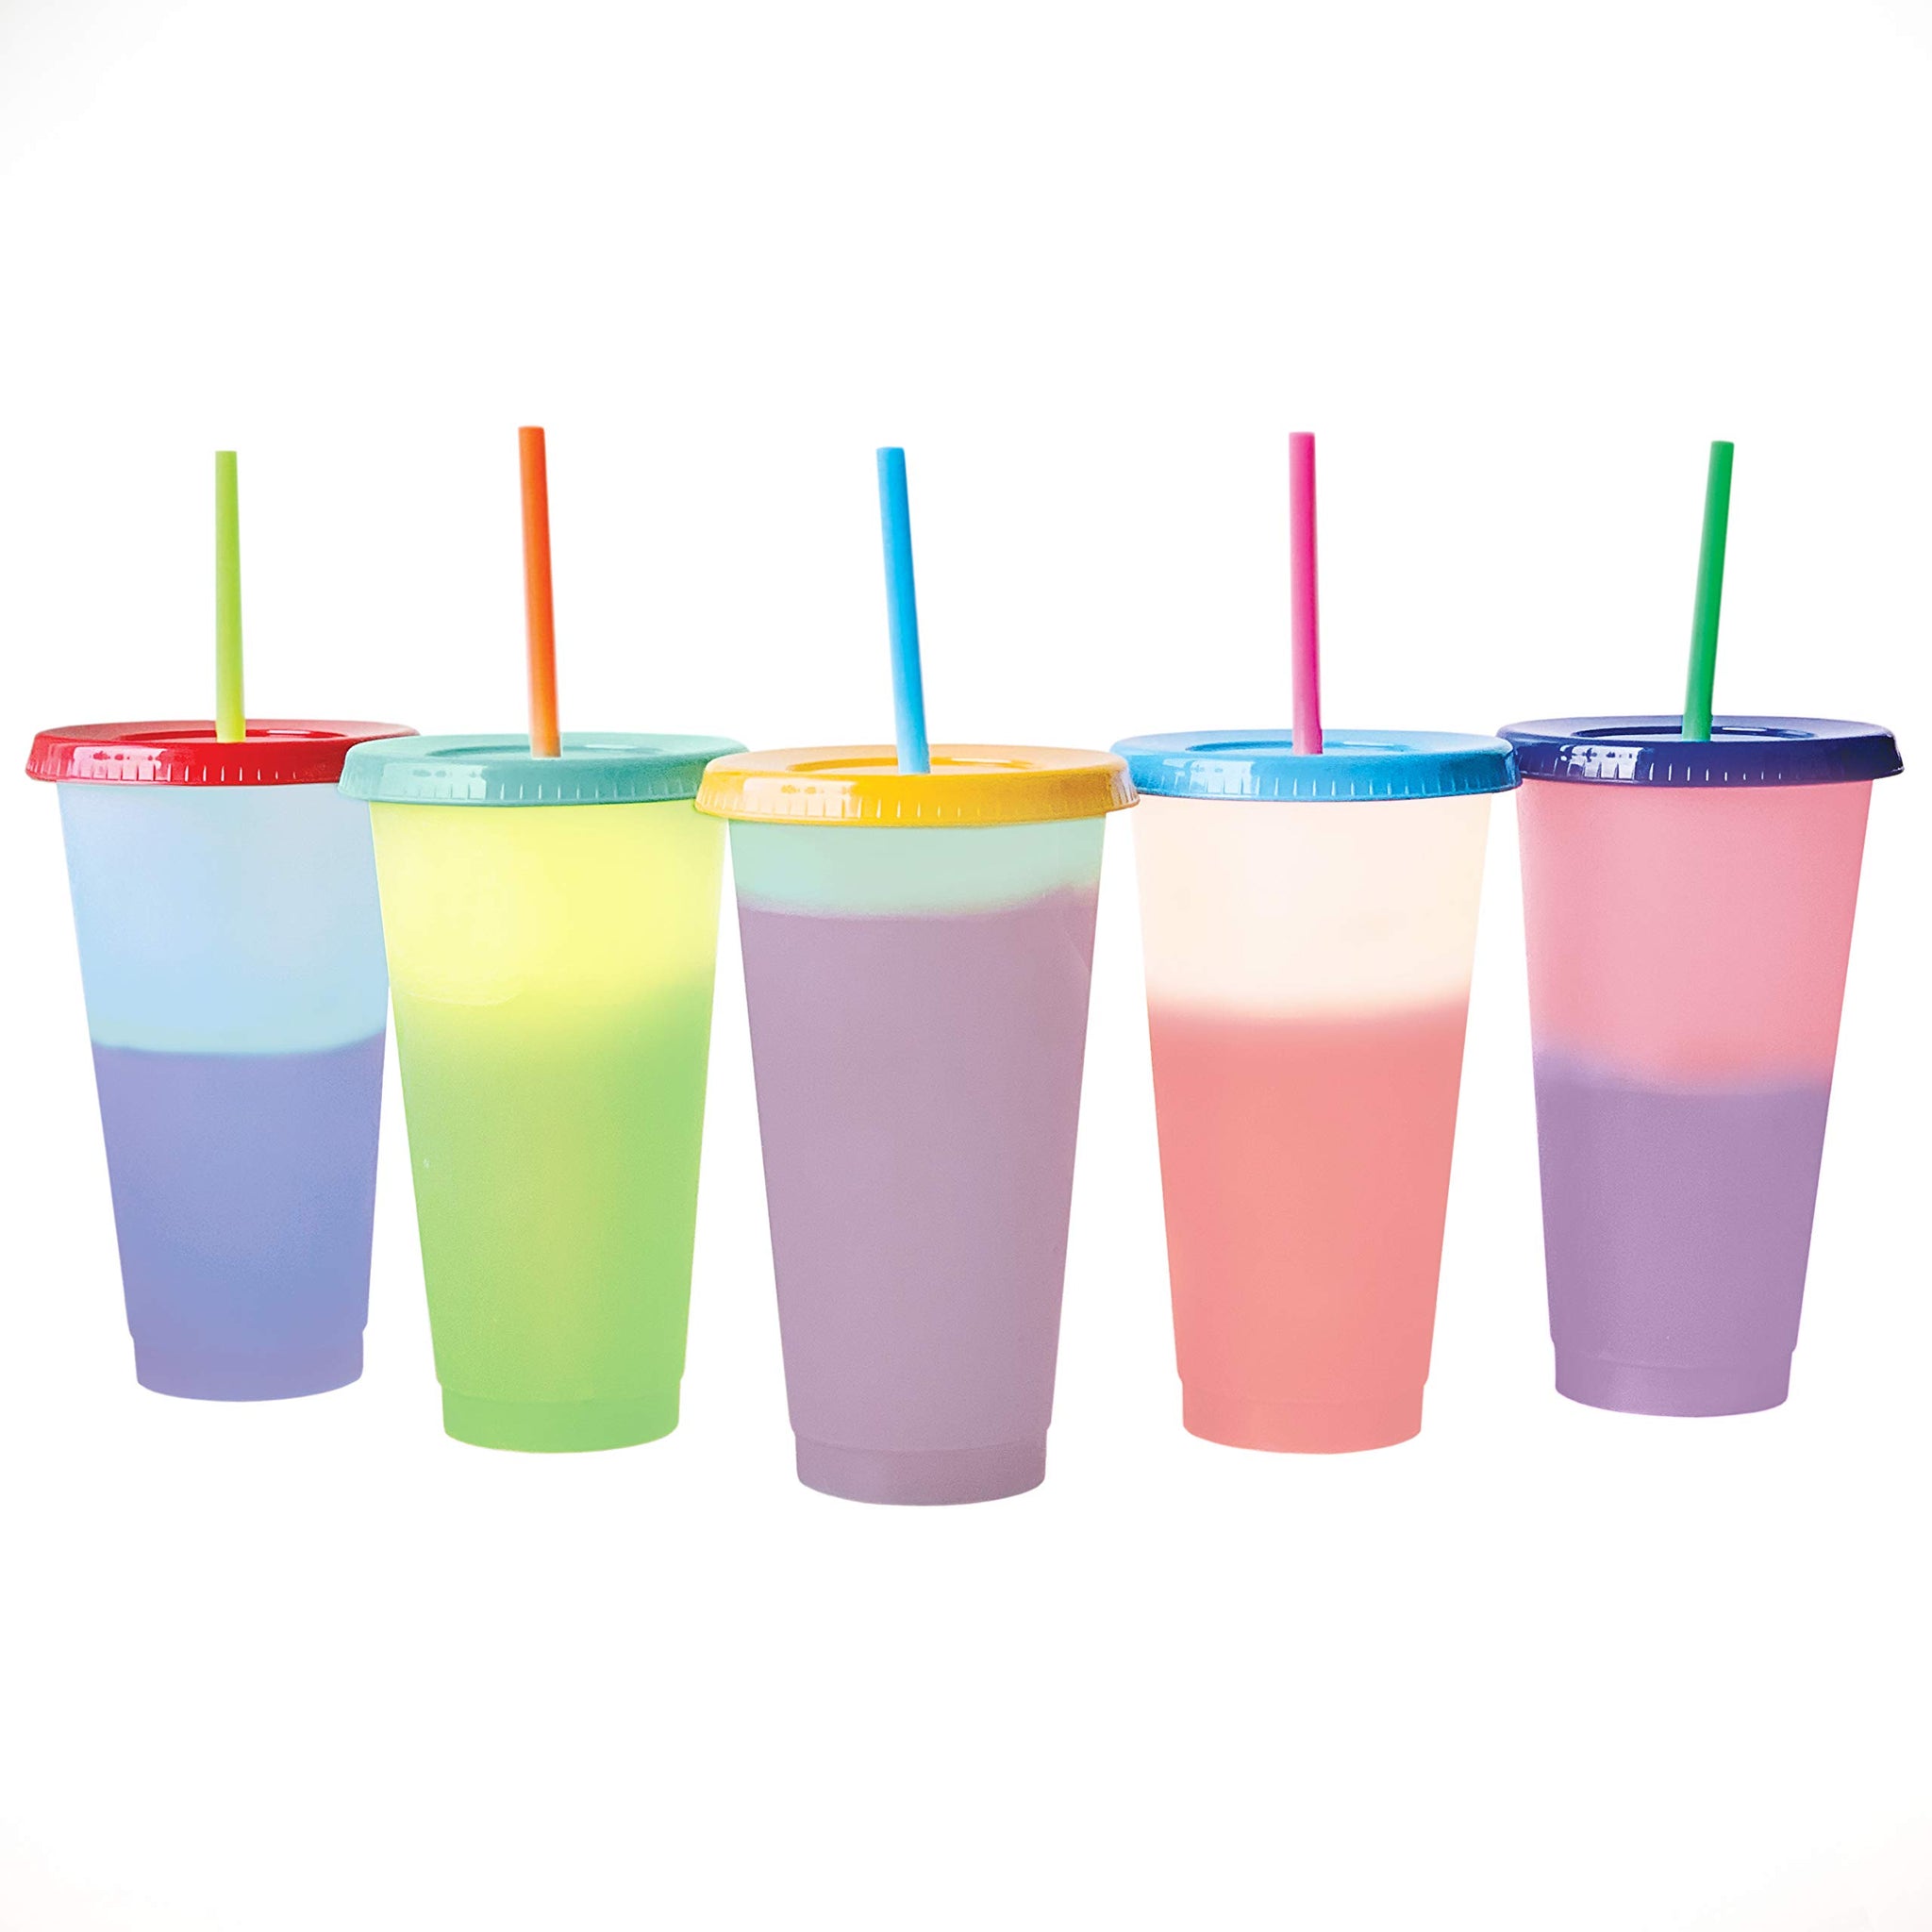 5 Pcs Reusable Plastic Cups with Straw and Lids - 24oz Durable